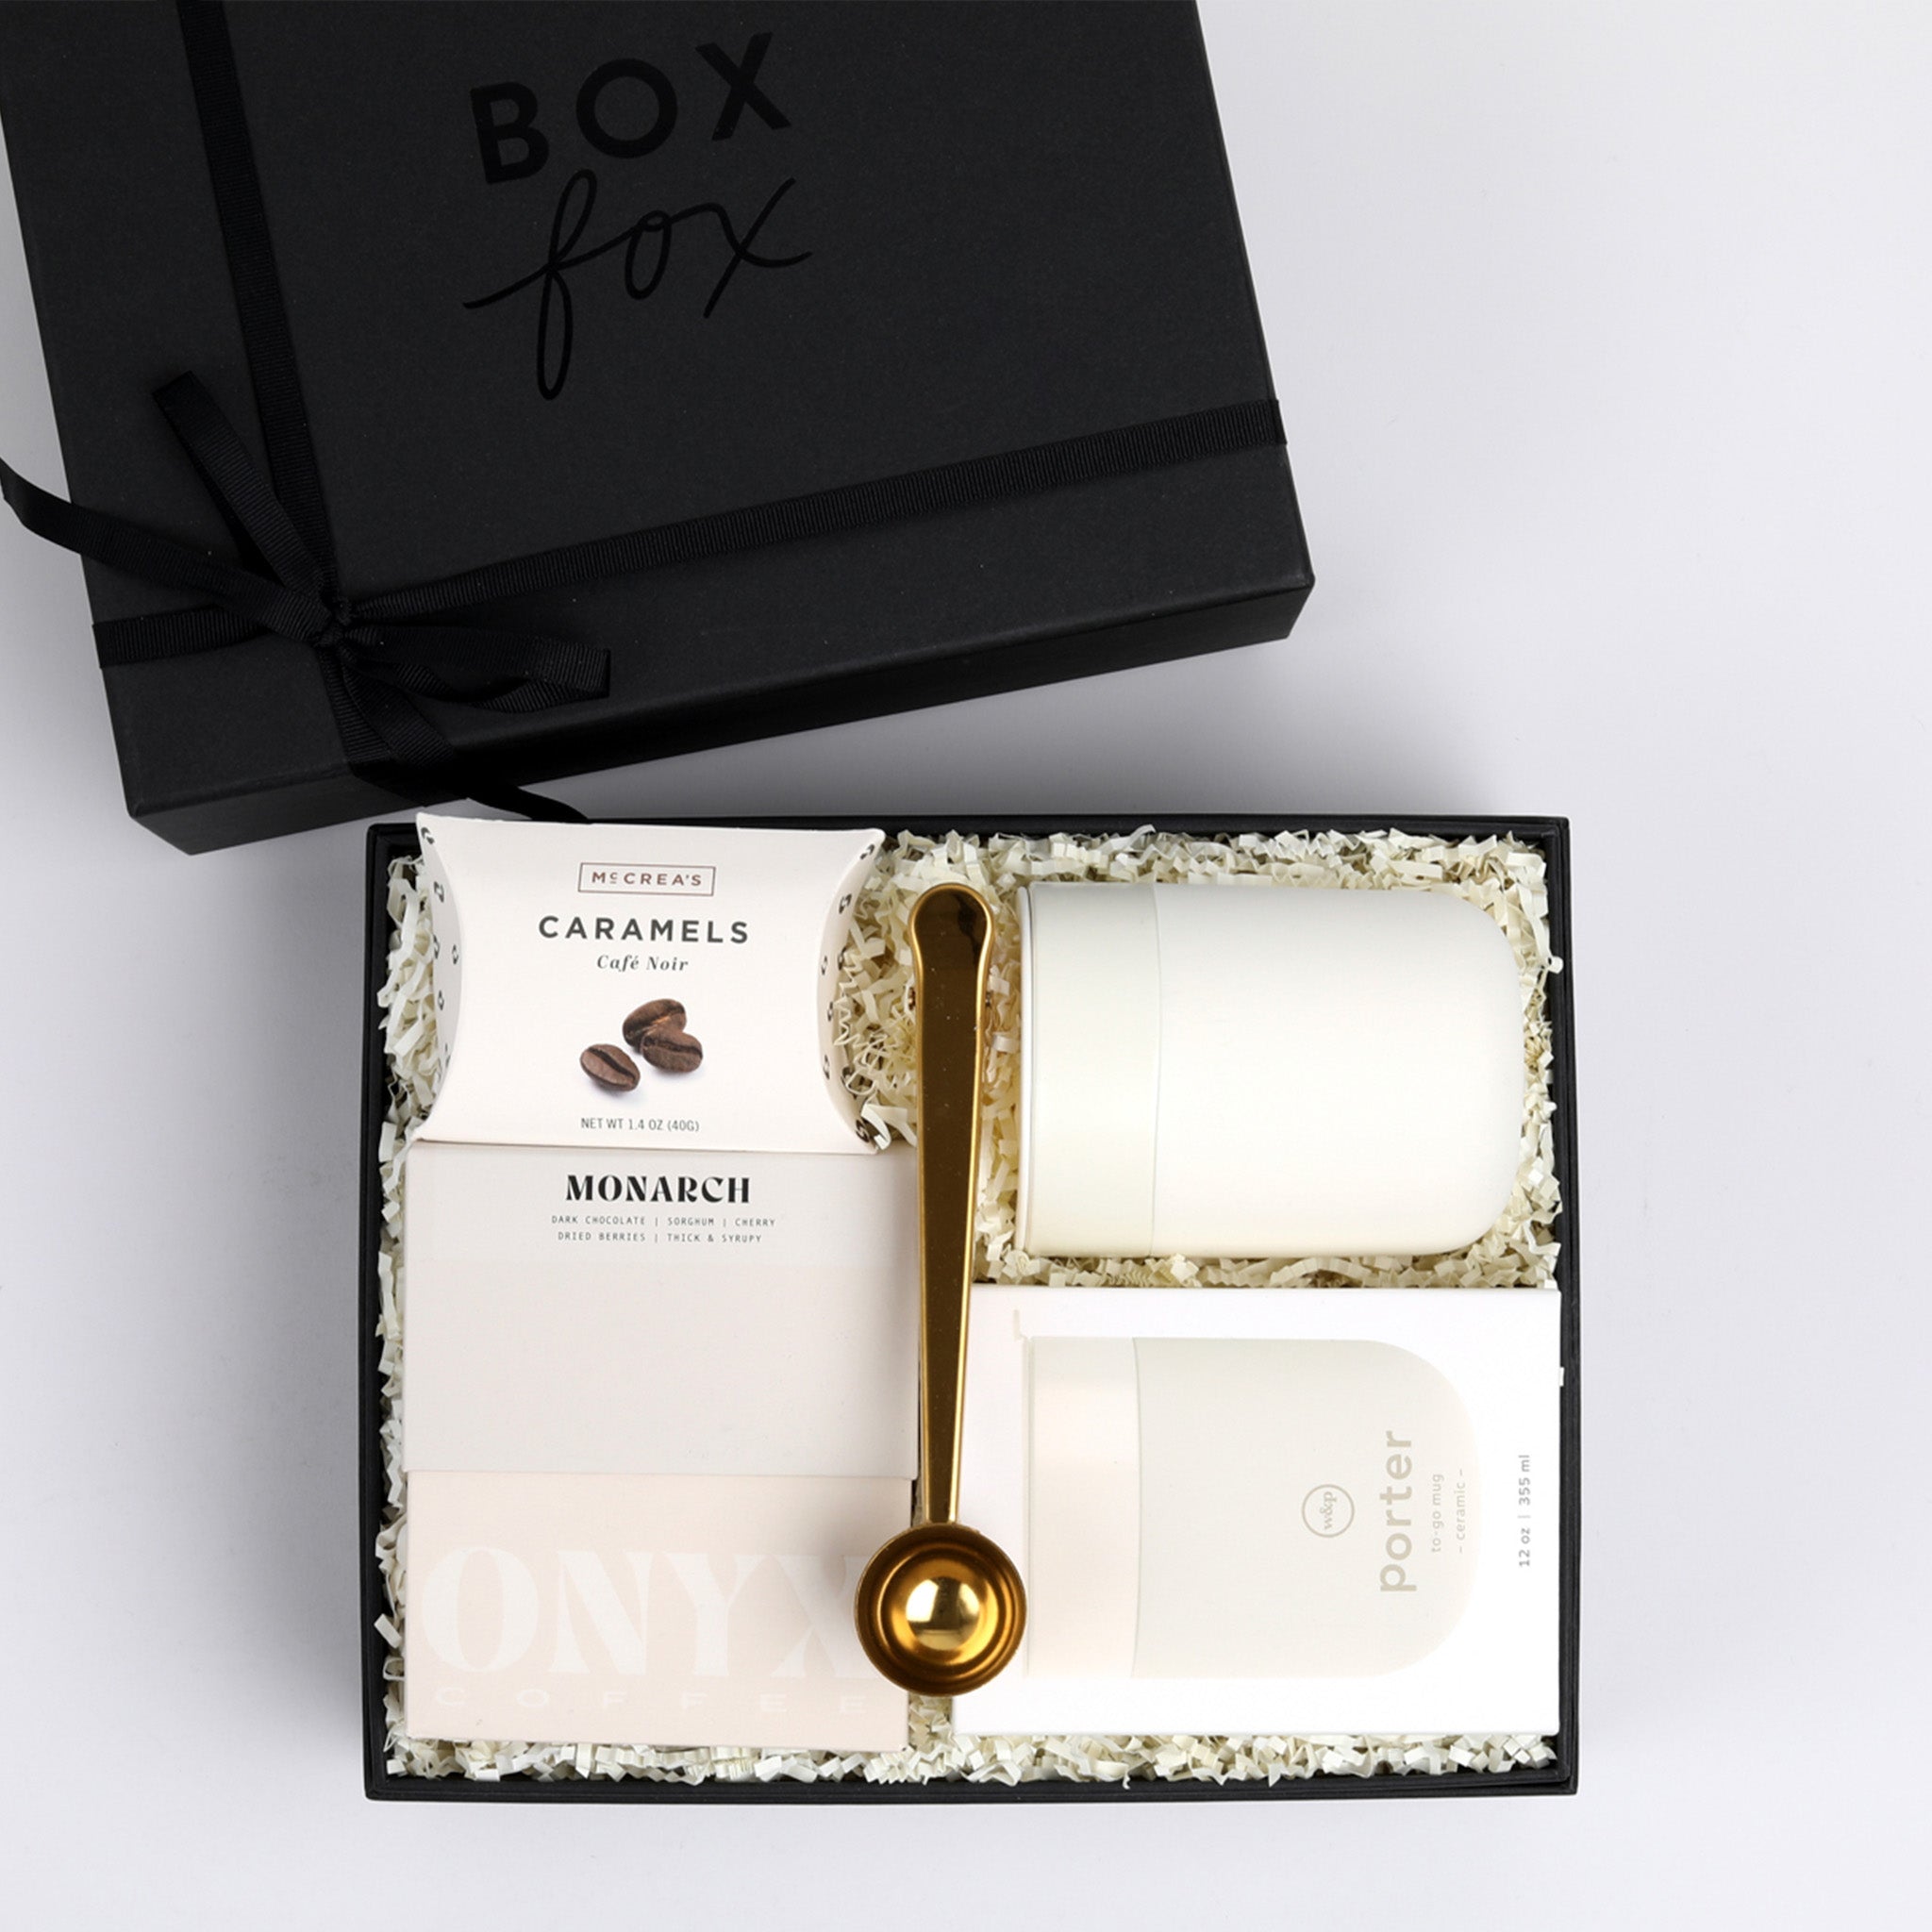 Black Matte BOXFOX gift box packed with gold coffee scoop, coffee caramels, cream mug and box of coffee 